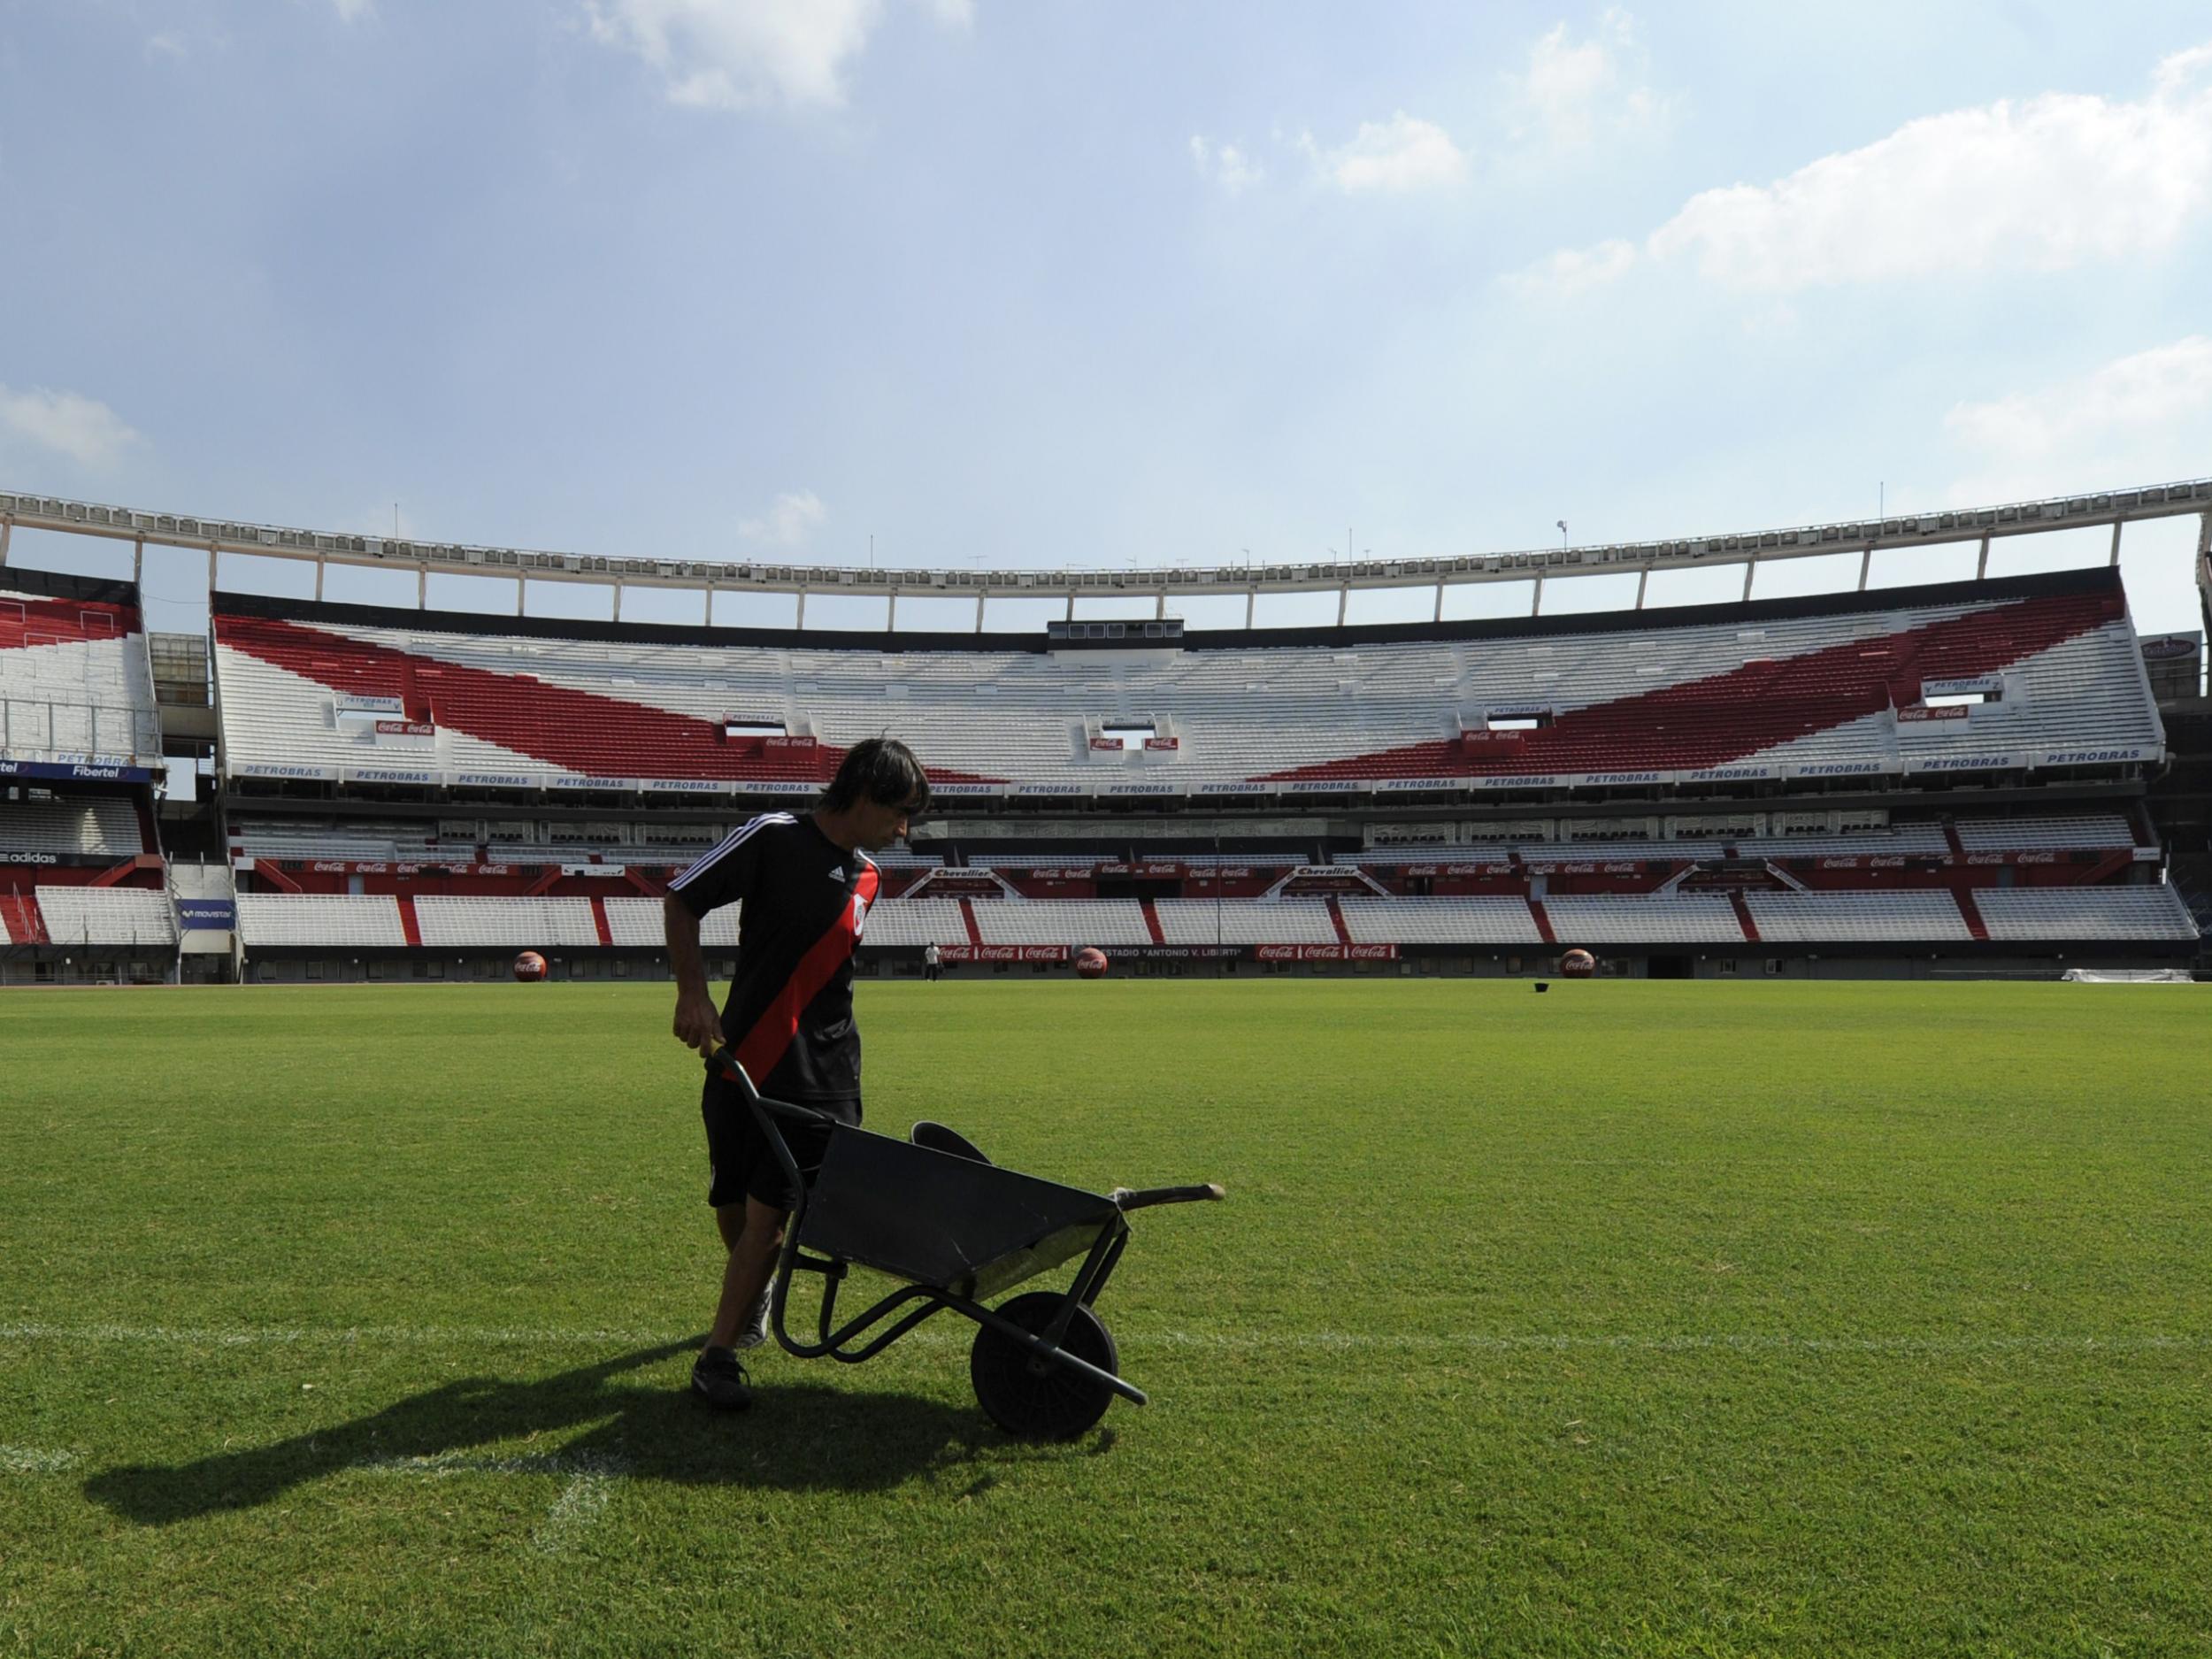 When will River play another league game at El Monumental?